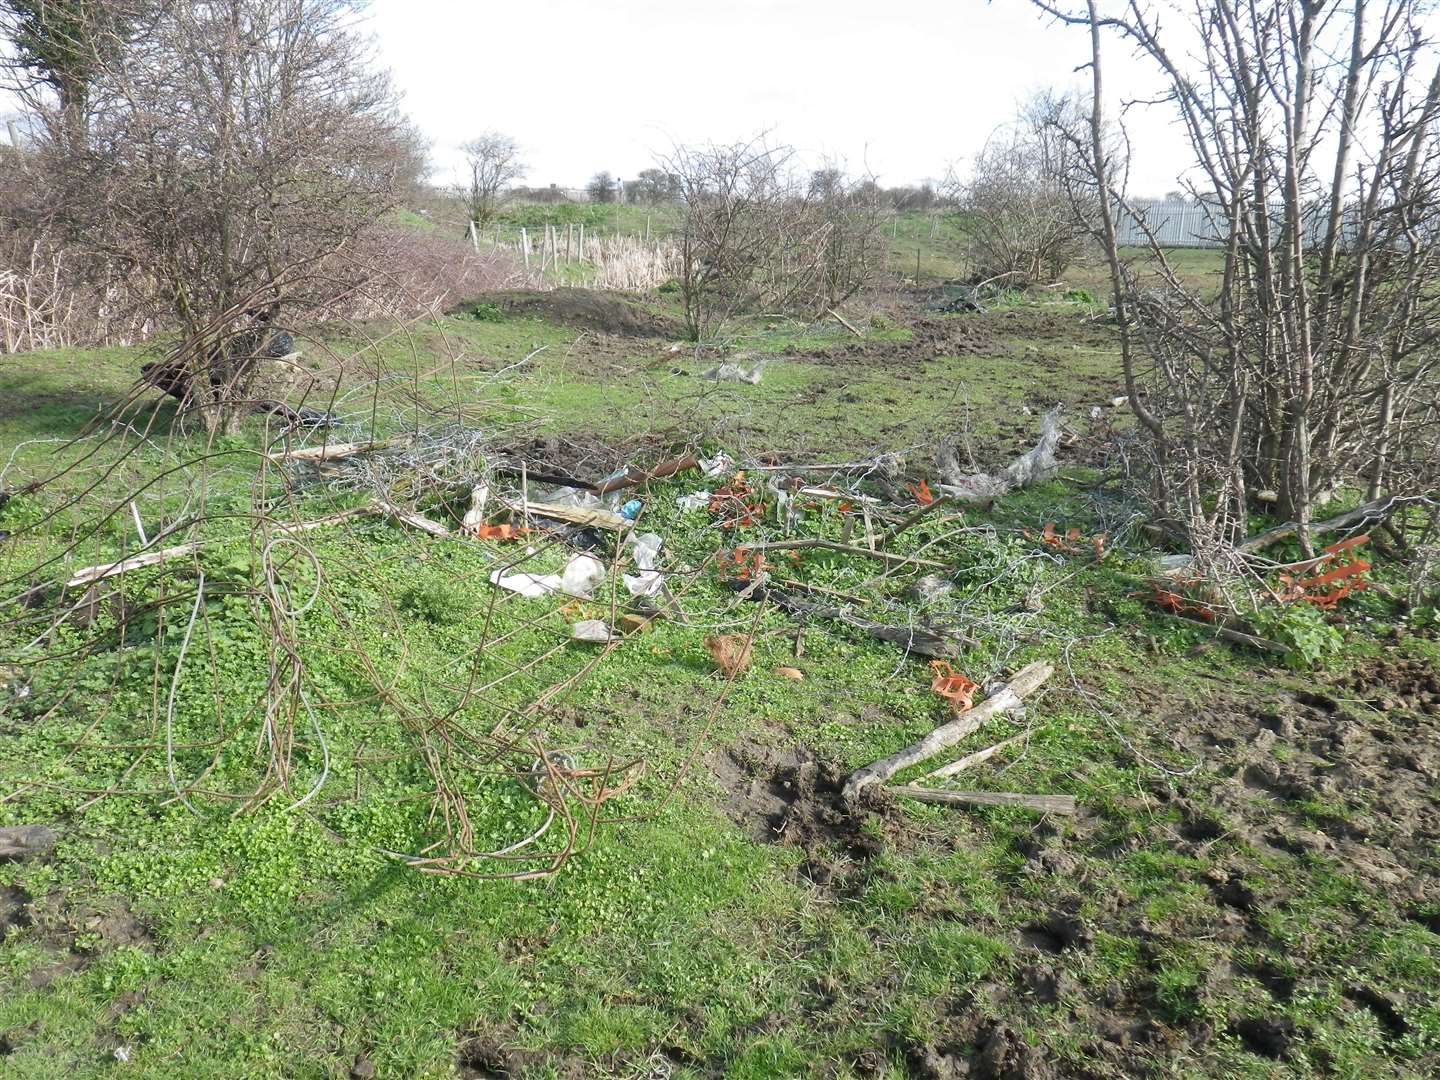 Barbed wire, plastic netting and litter were found dumped next to the horses. (3177504)